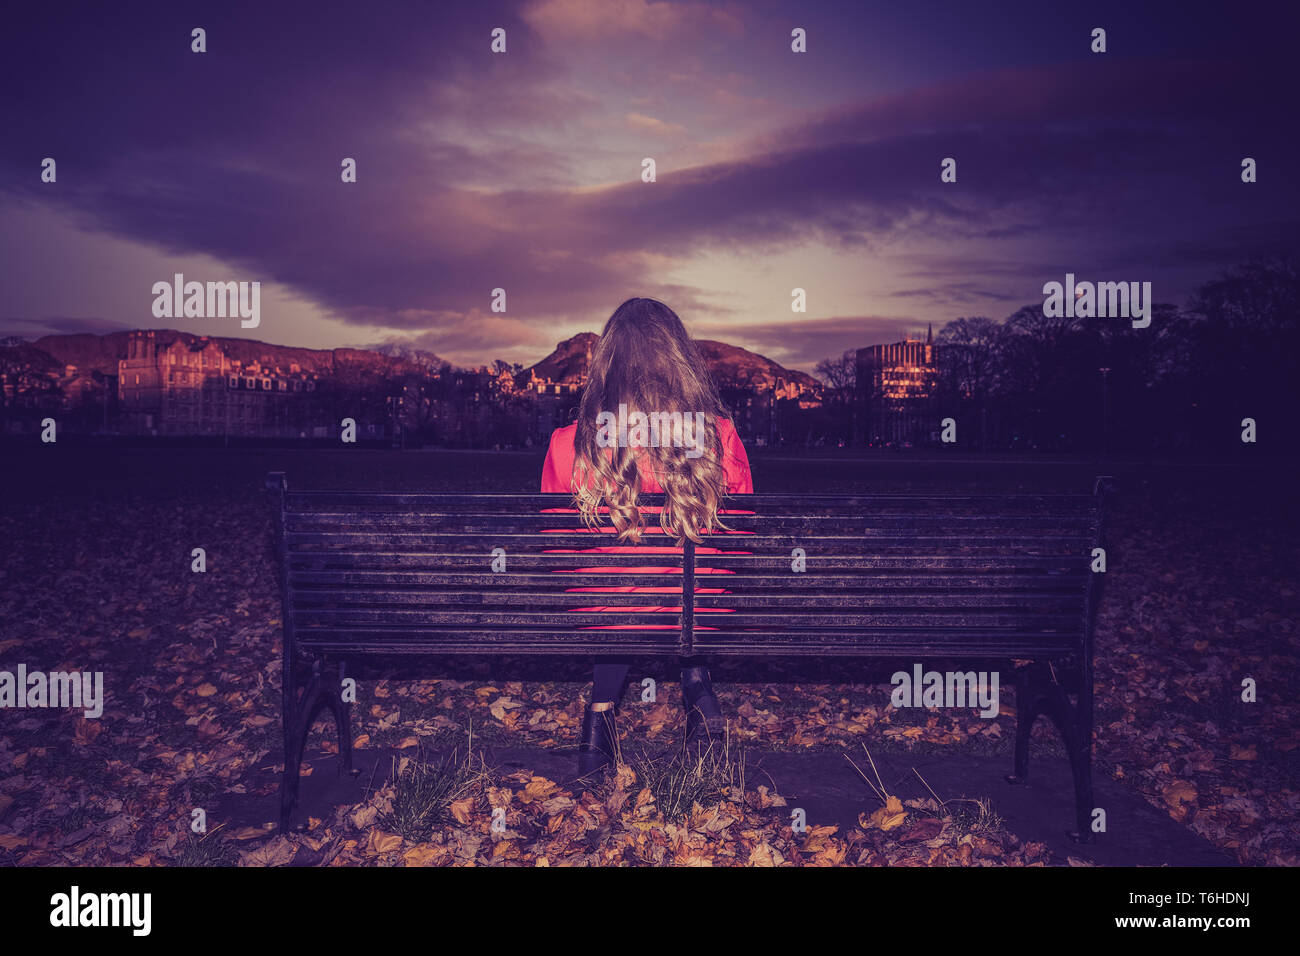 Young woman all alone on a bench in a park at sunset. Stock Photo